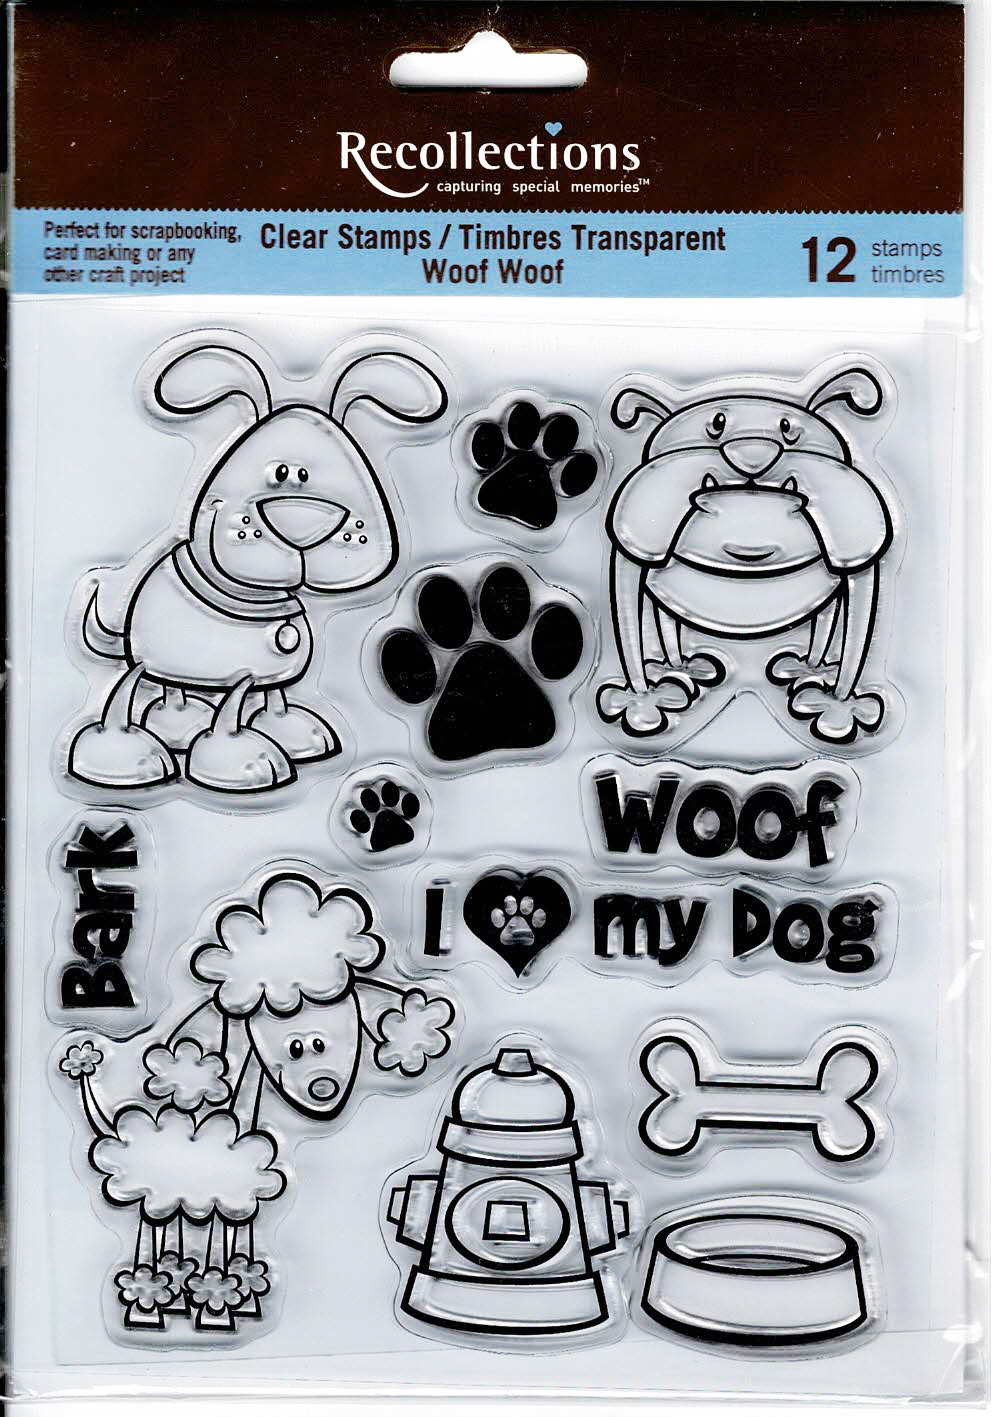 Recollections Clear Stamps 4.75" x 5.5" - Woof Woof